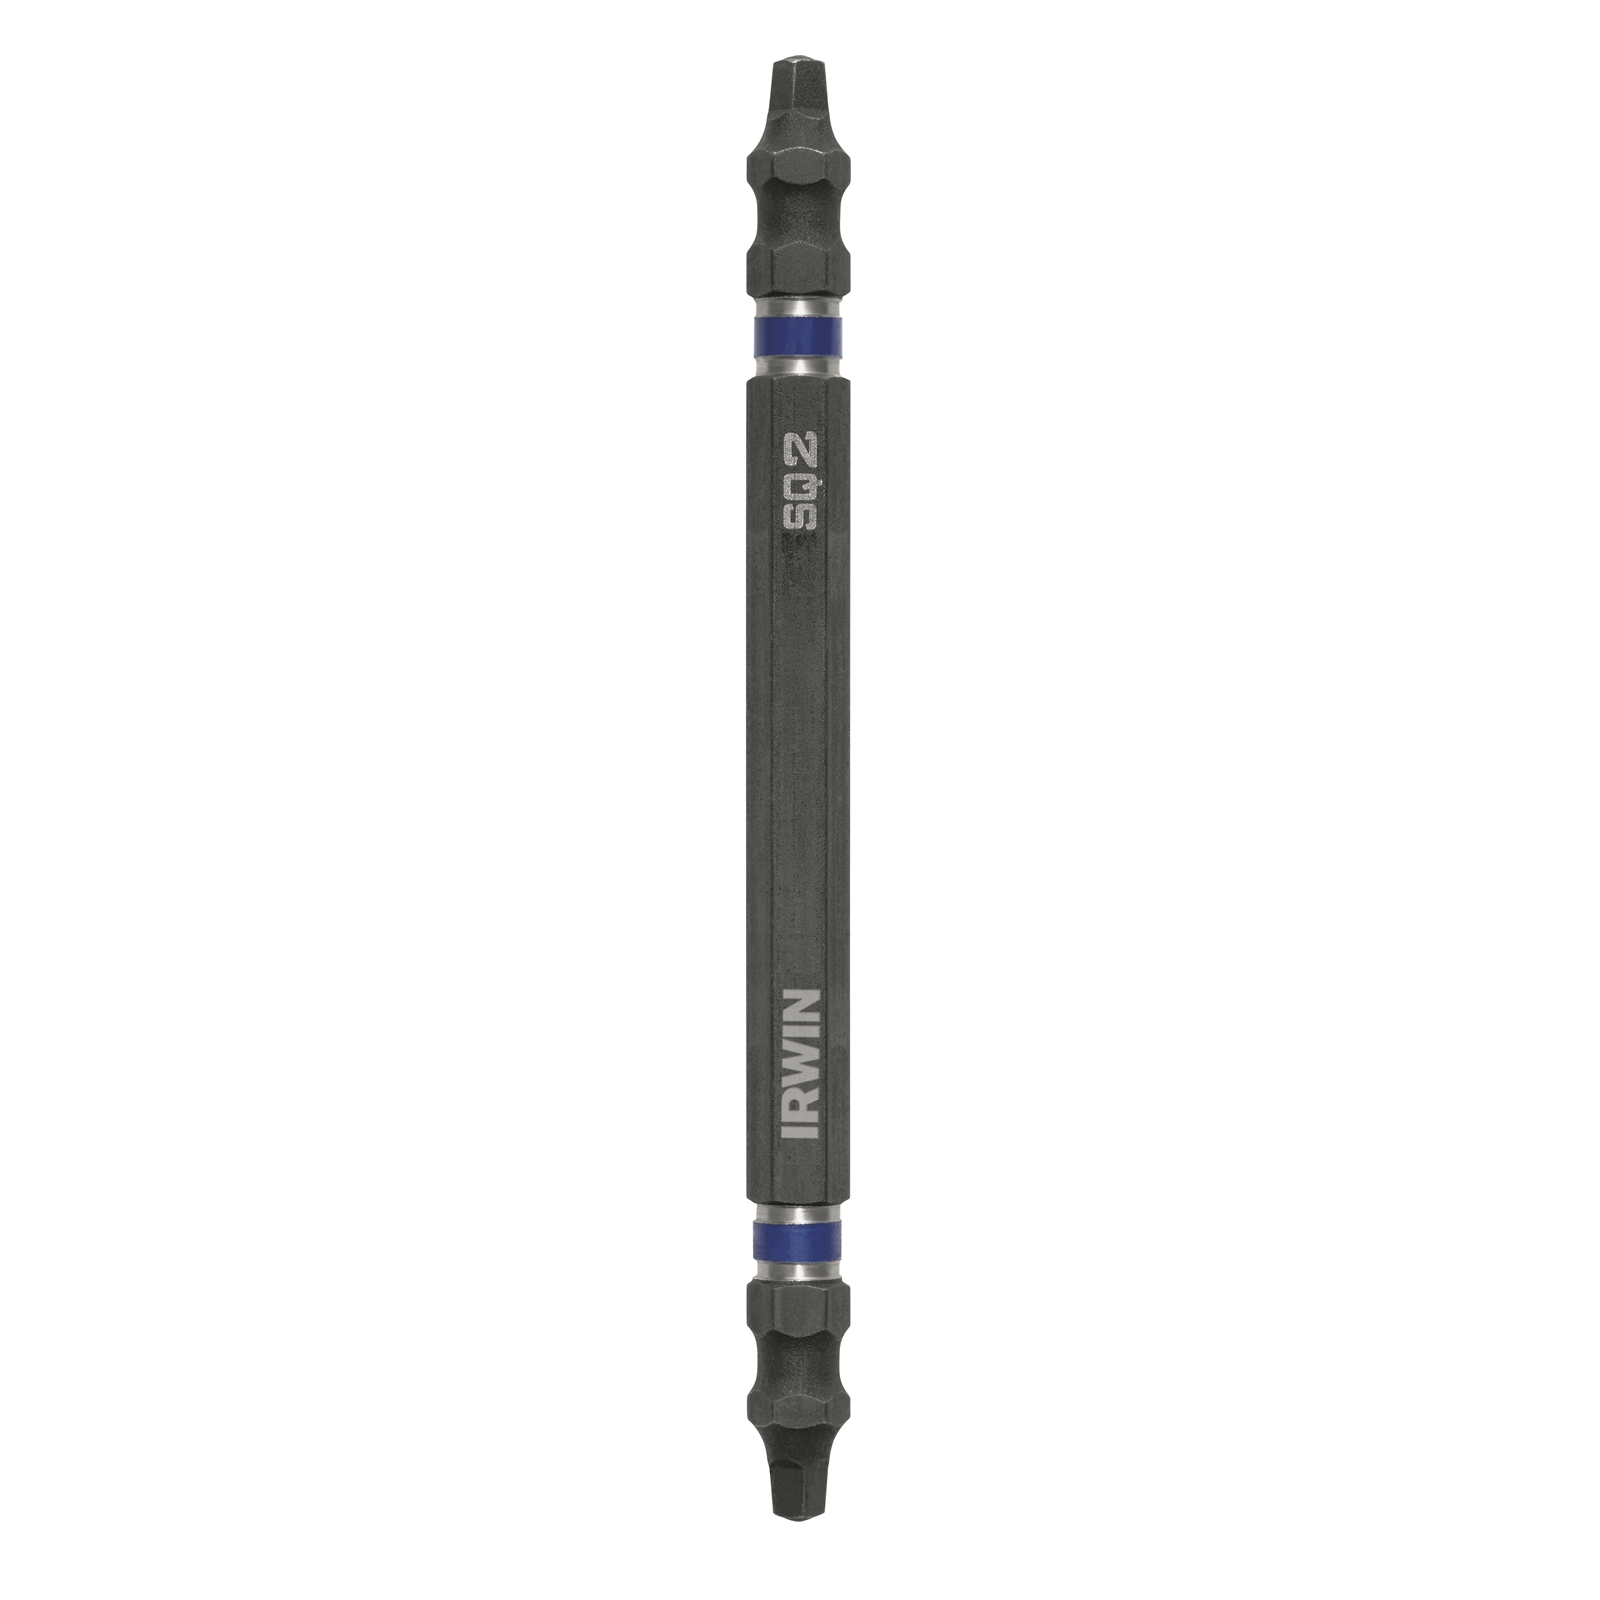 Irwin 100mm Square 2 Impact Double Ended Screwdriver Bits